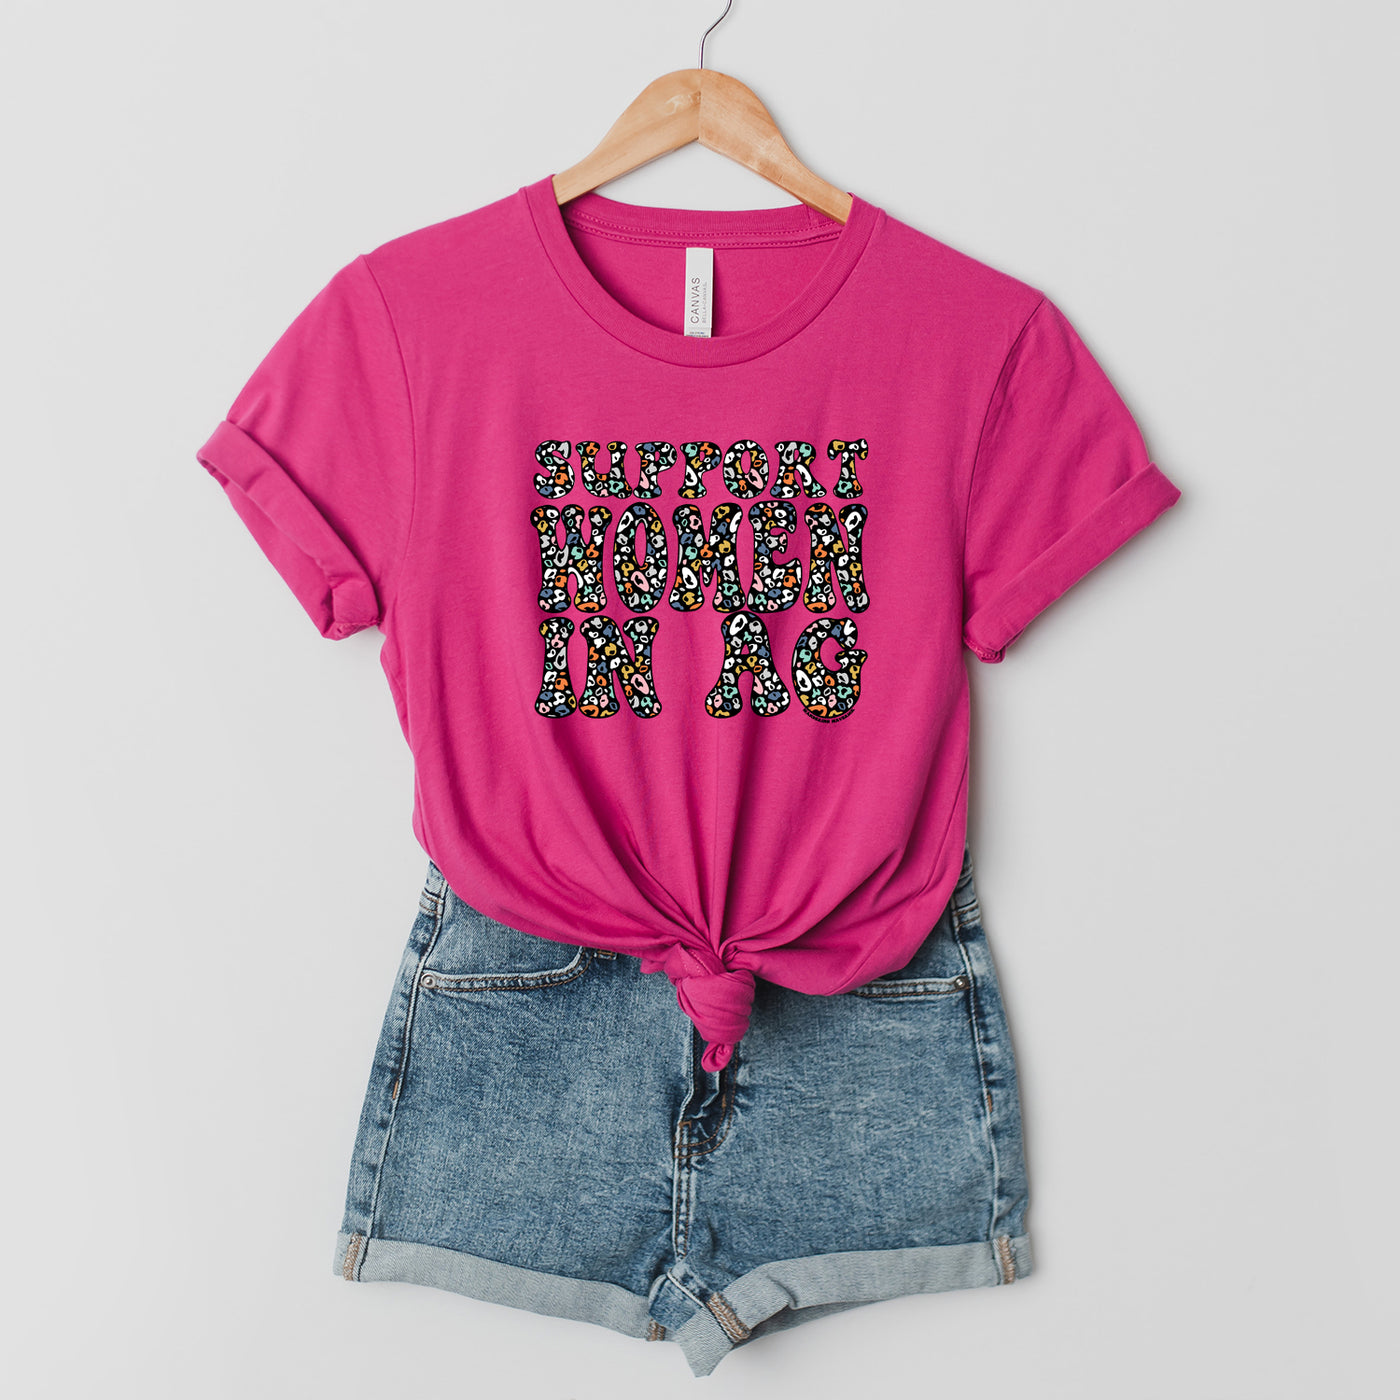 Colorful Cheetah Support Women In Ag T-Shirt (XS-4XL) - Multiple Colors!